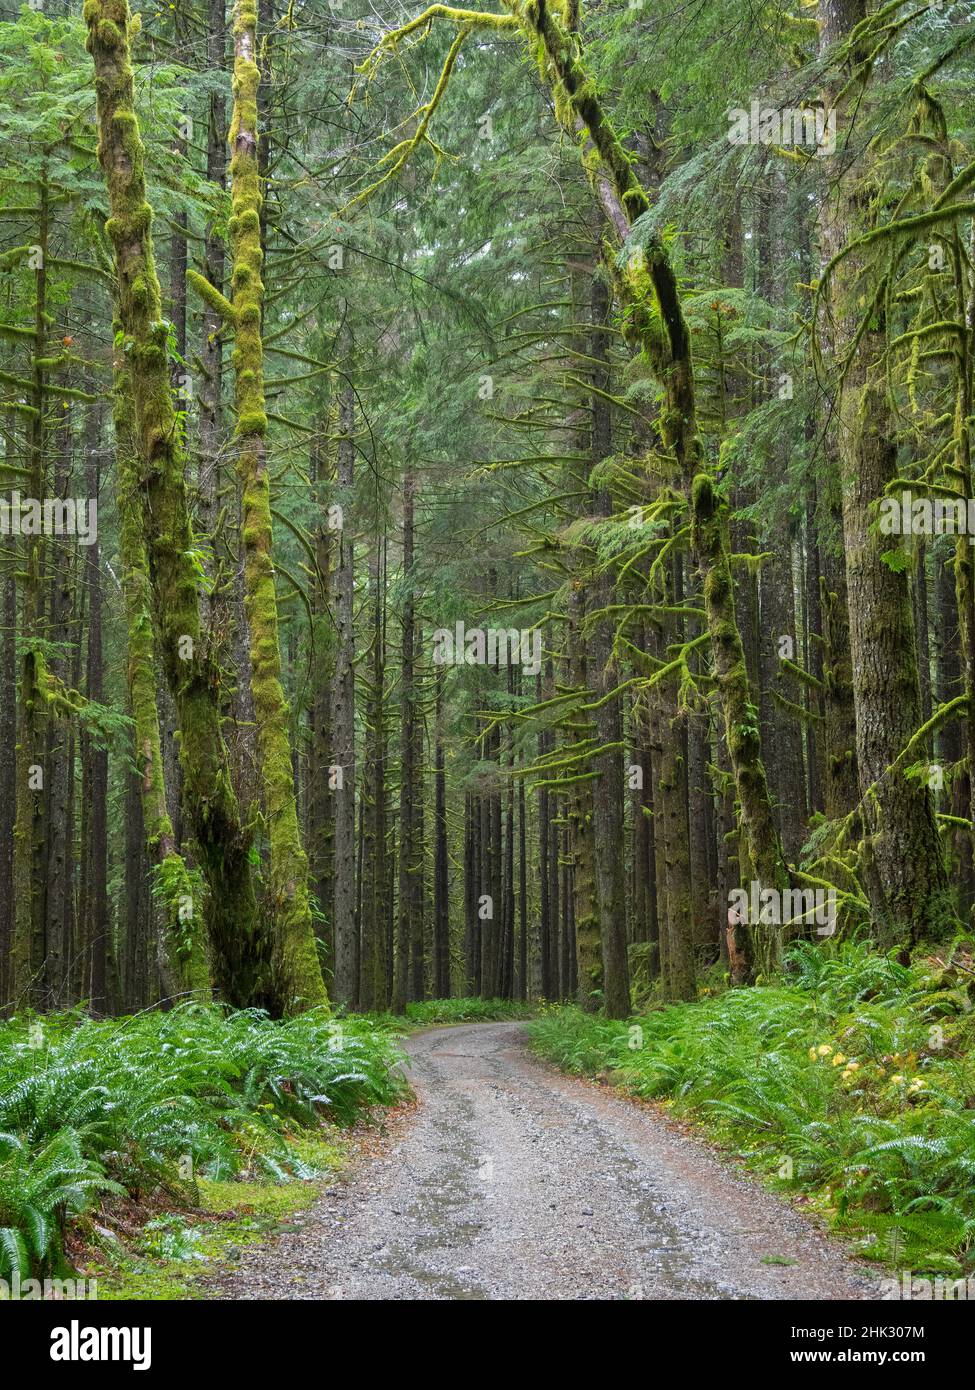 Washington State, Central Cascades, Forest Road 5620, Moss covered Red Alder forest Stock Photo